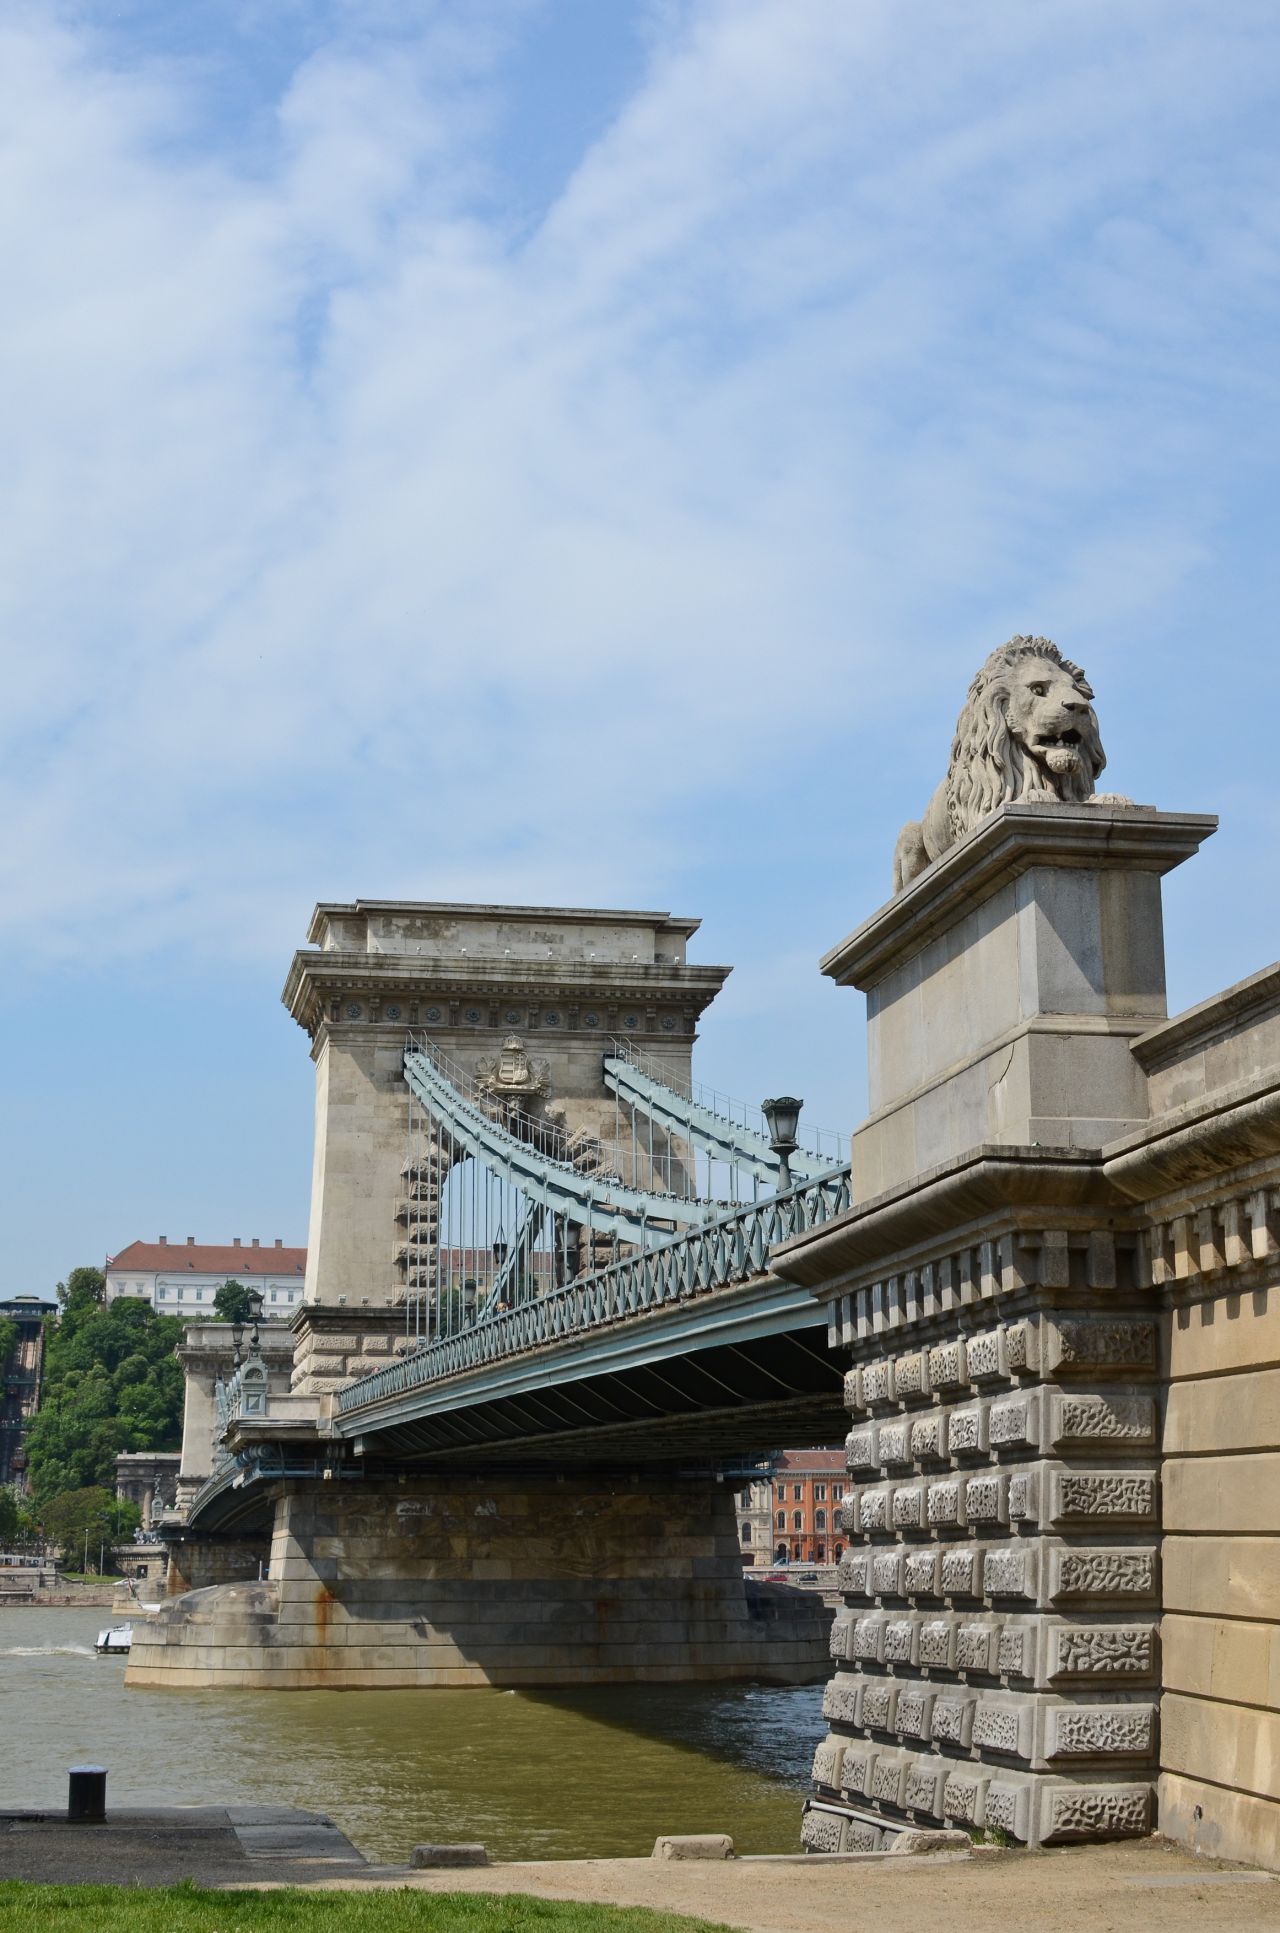 This important link between Buda and Pest was blown up during World War II but replaced by a pretty good replica. 